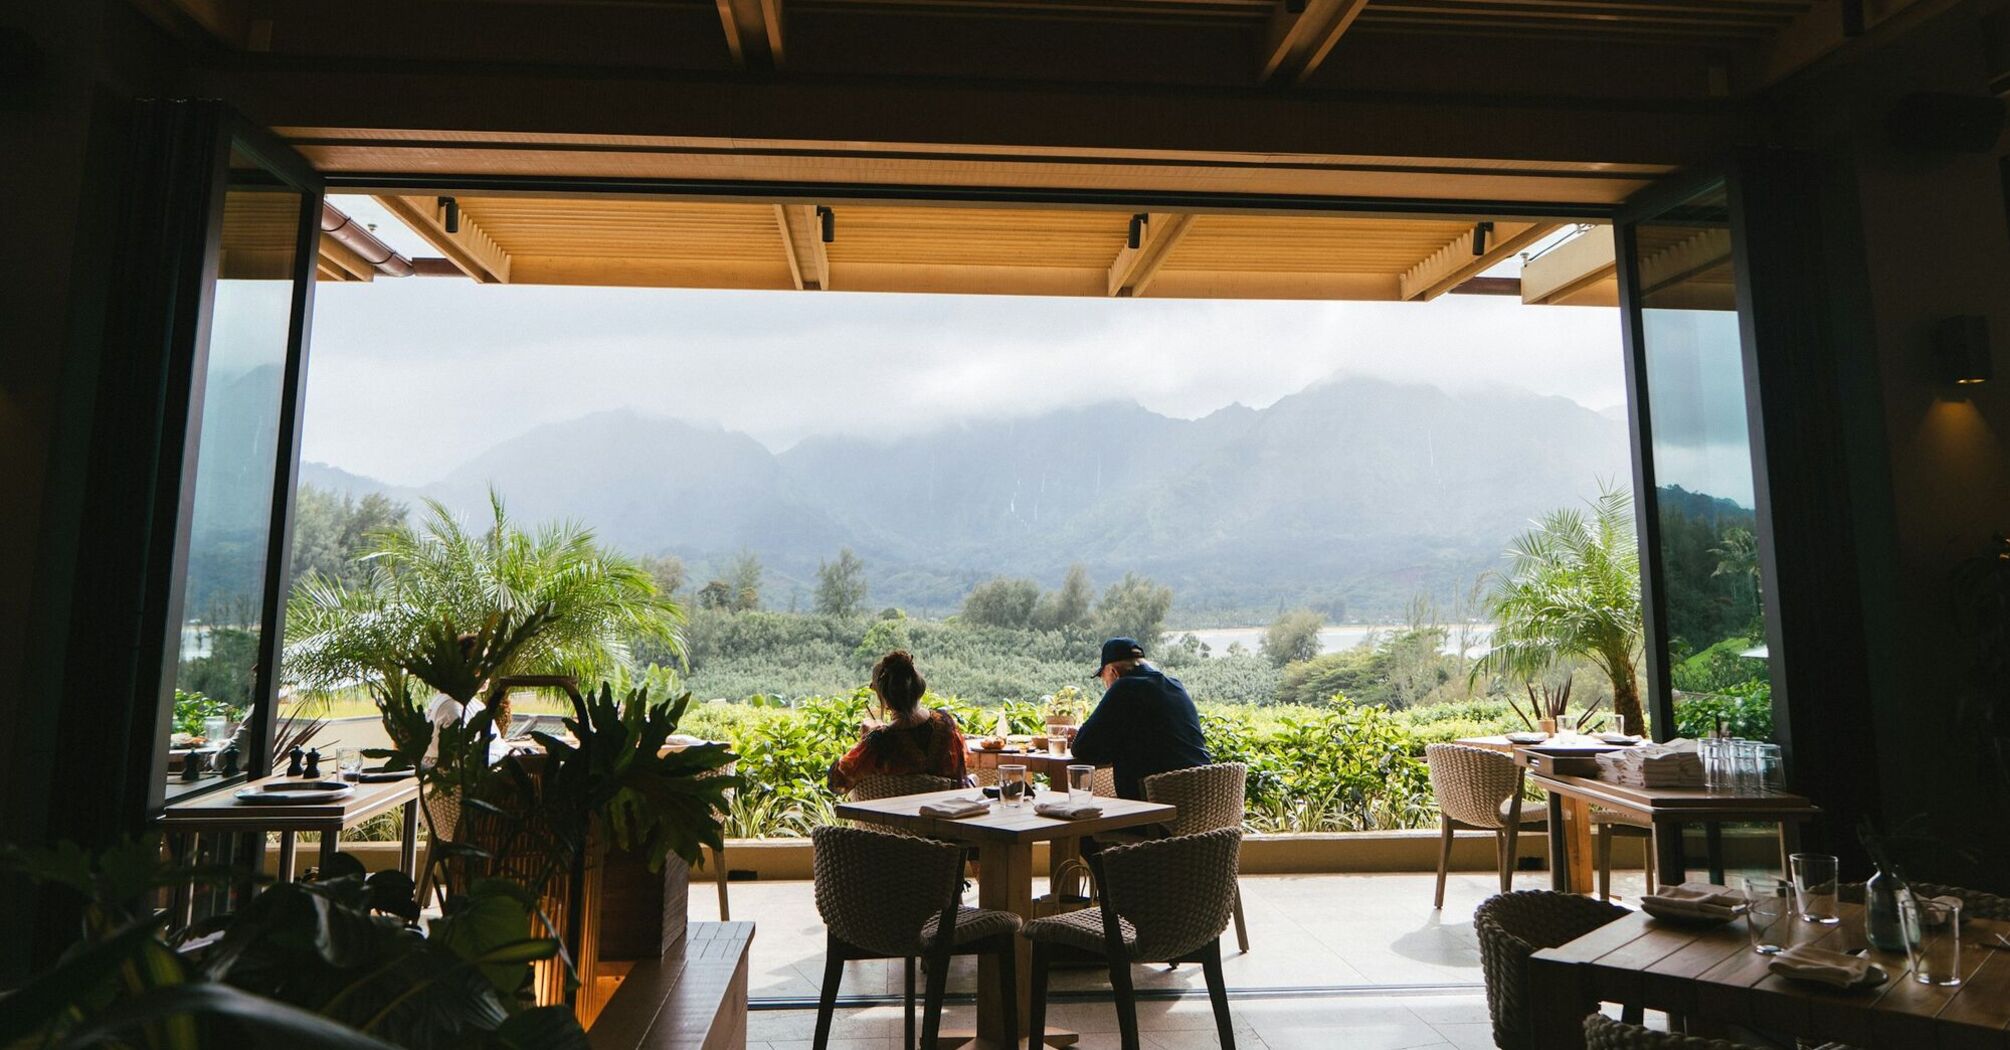 1 Hotel Hanalei Bay, View from a hotel terrace with diners overlooking lush green mountains